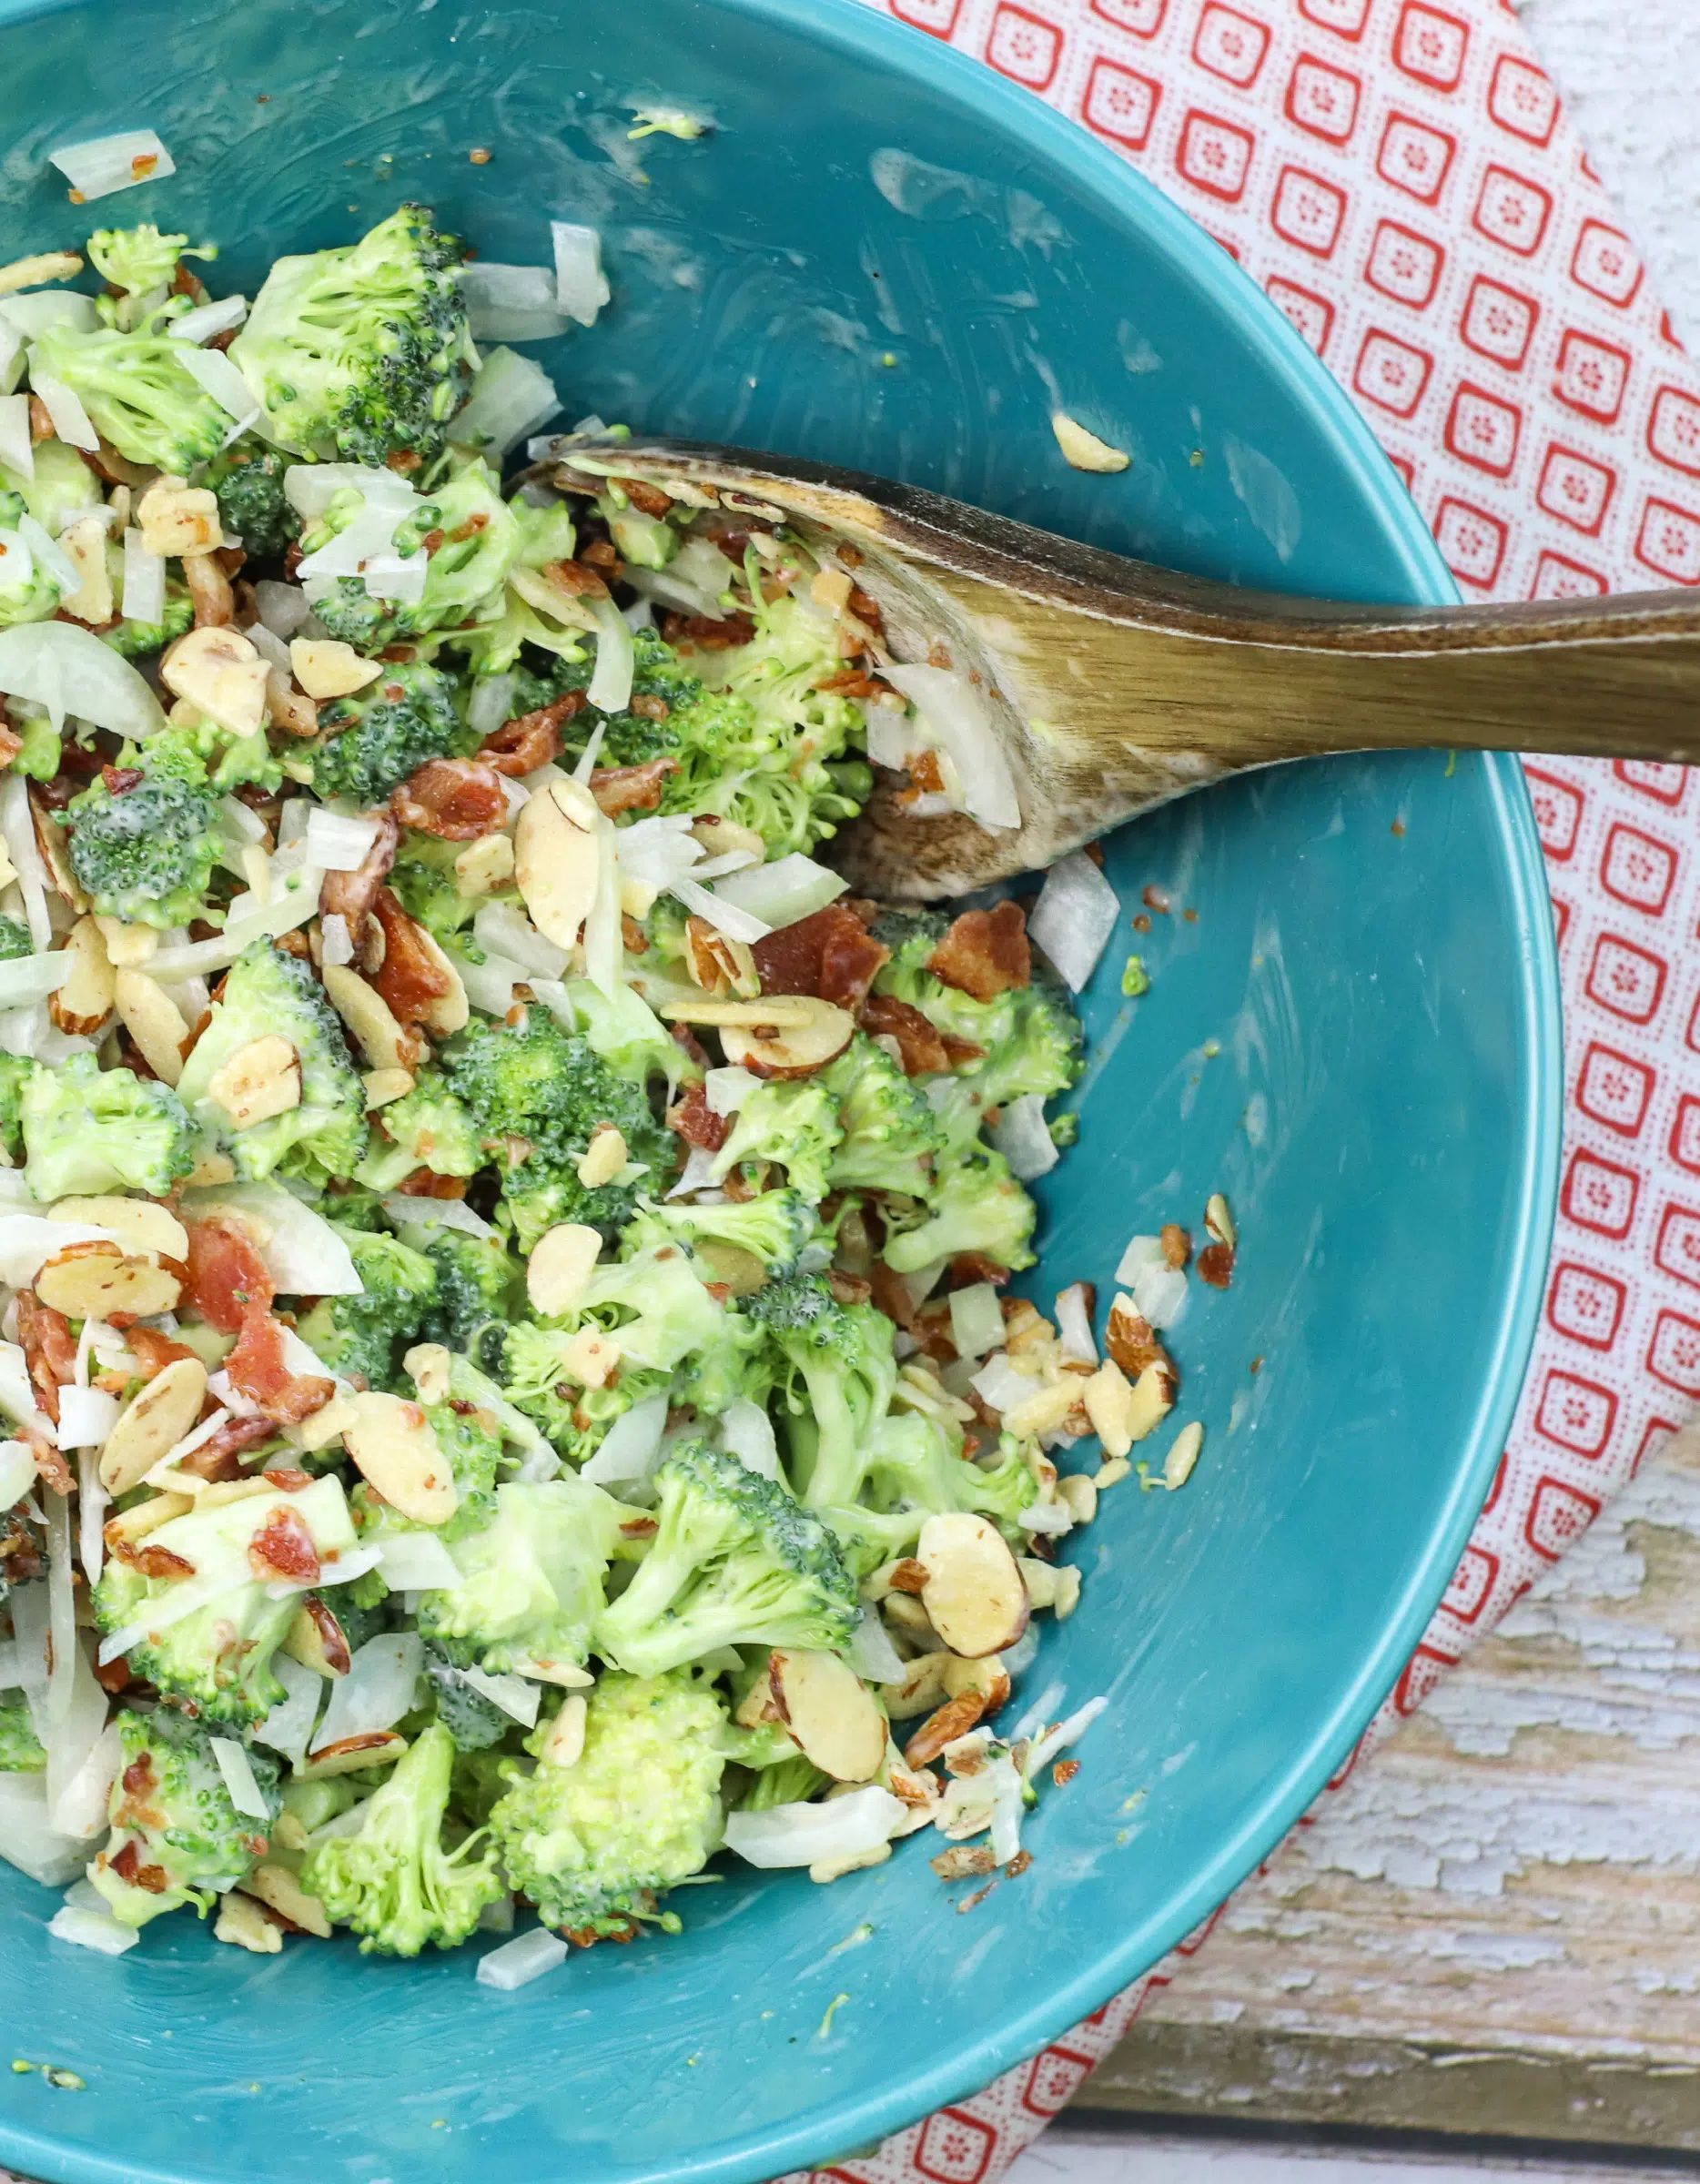 bowl of broccoli salad with wooden spoon